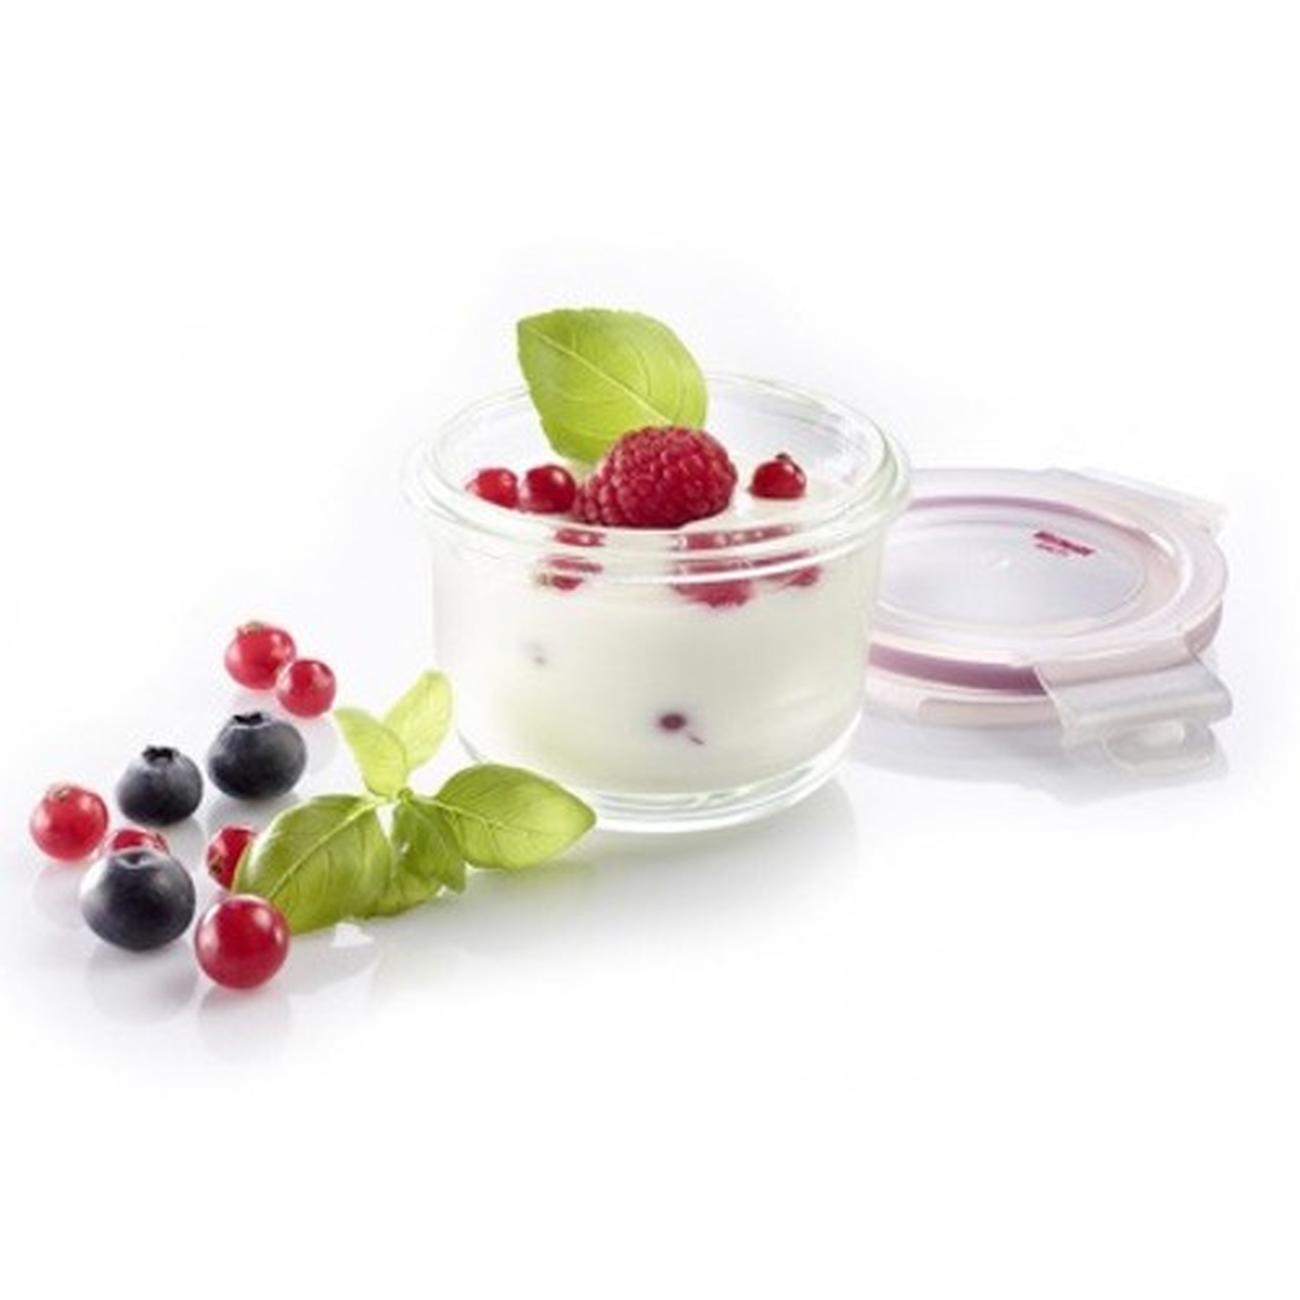 https://www.thekitchenwhisk.ie/contentfiles/productImages/Large/westmark-round-glass-food-storage-box150ml4.jpg